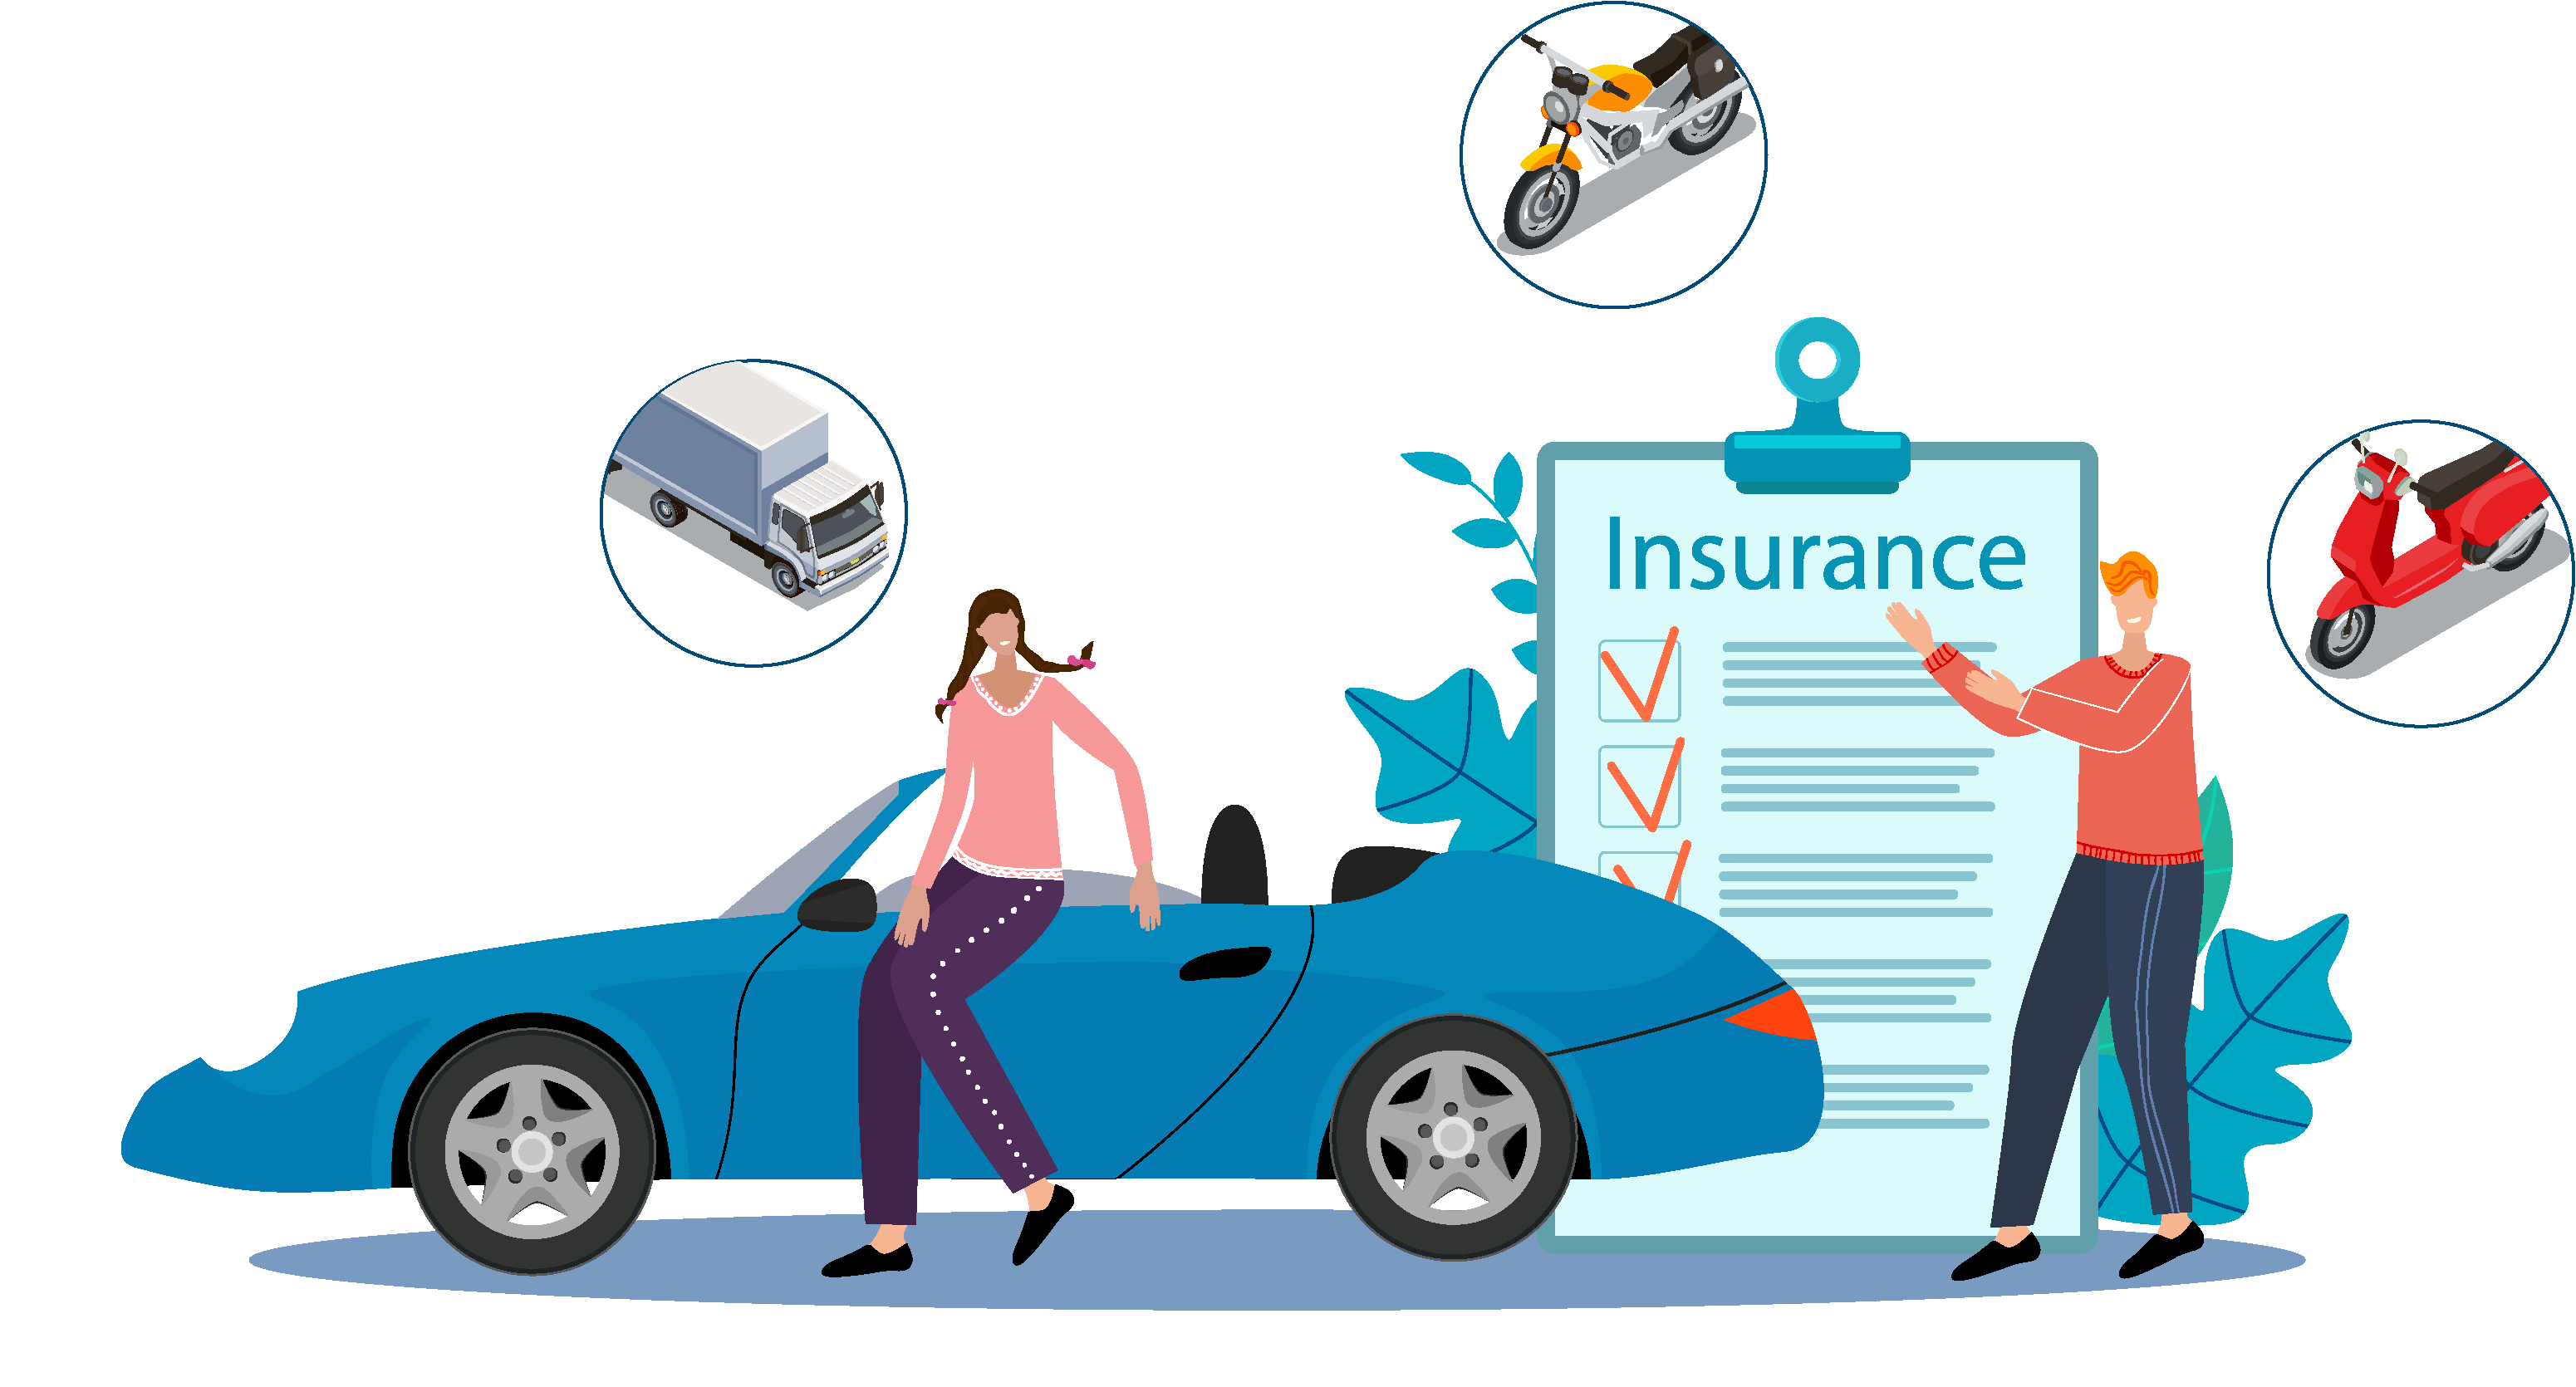 Car Insurance, Renew Car Insurance, Top things to keep in mind when Renewing Car Insurance